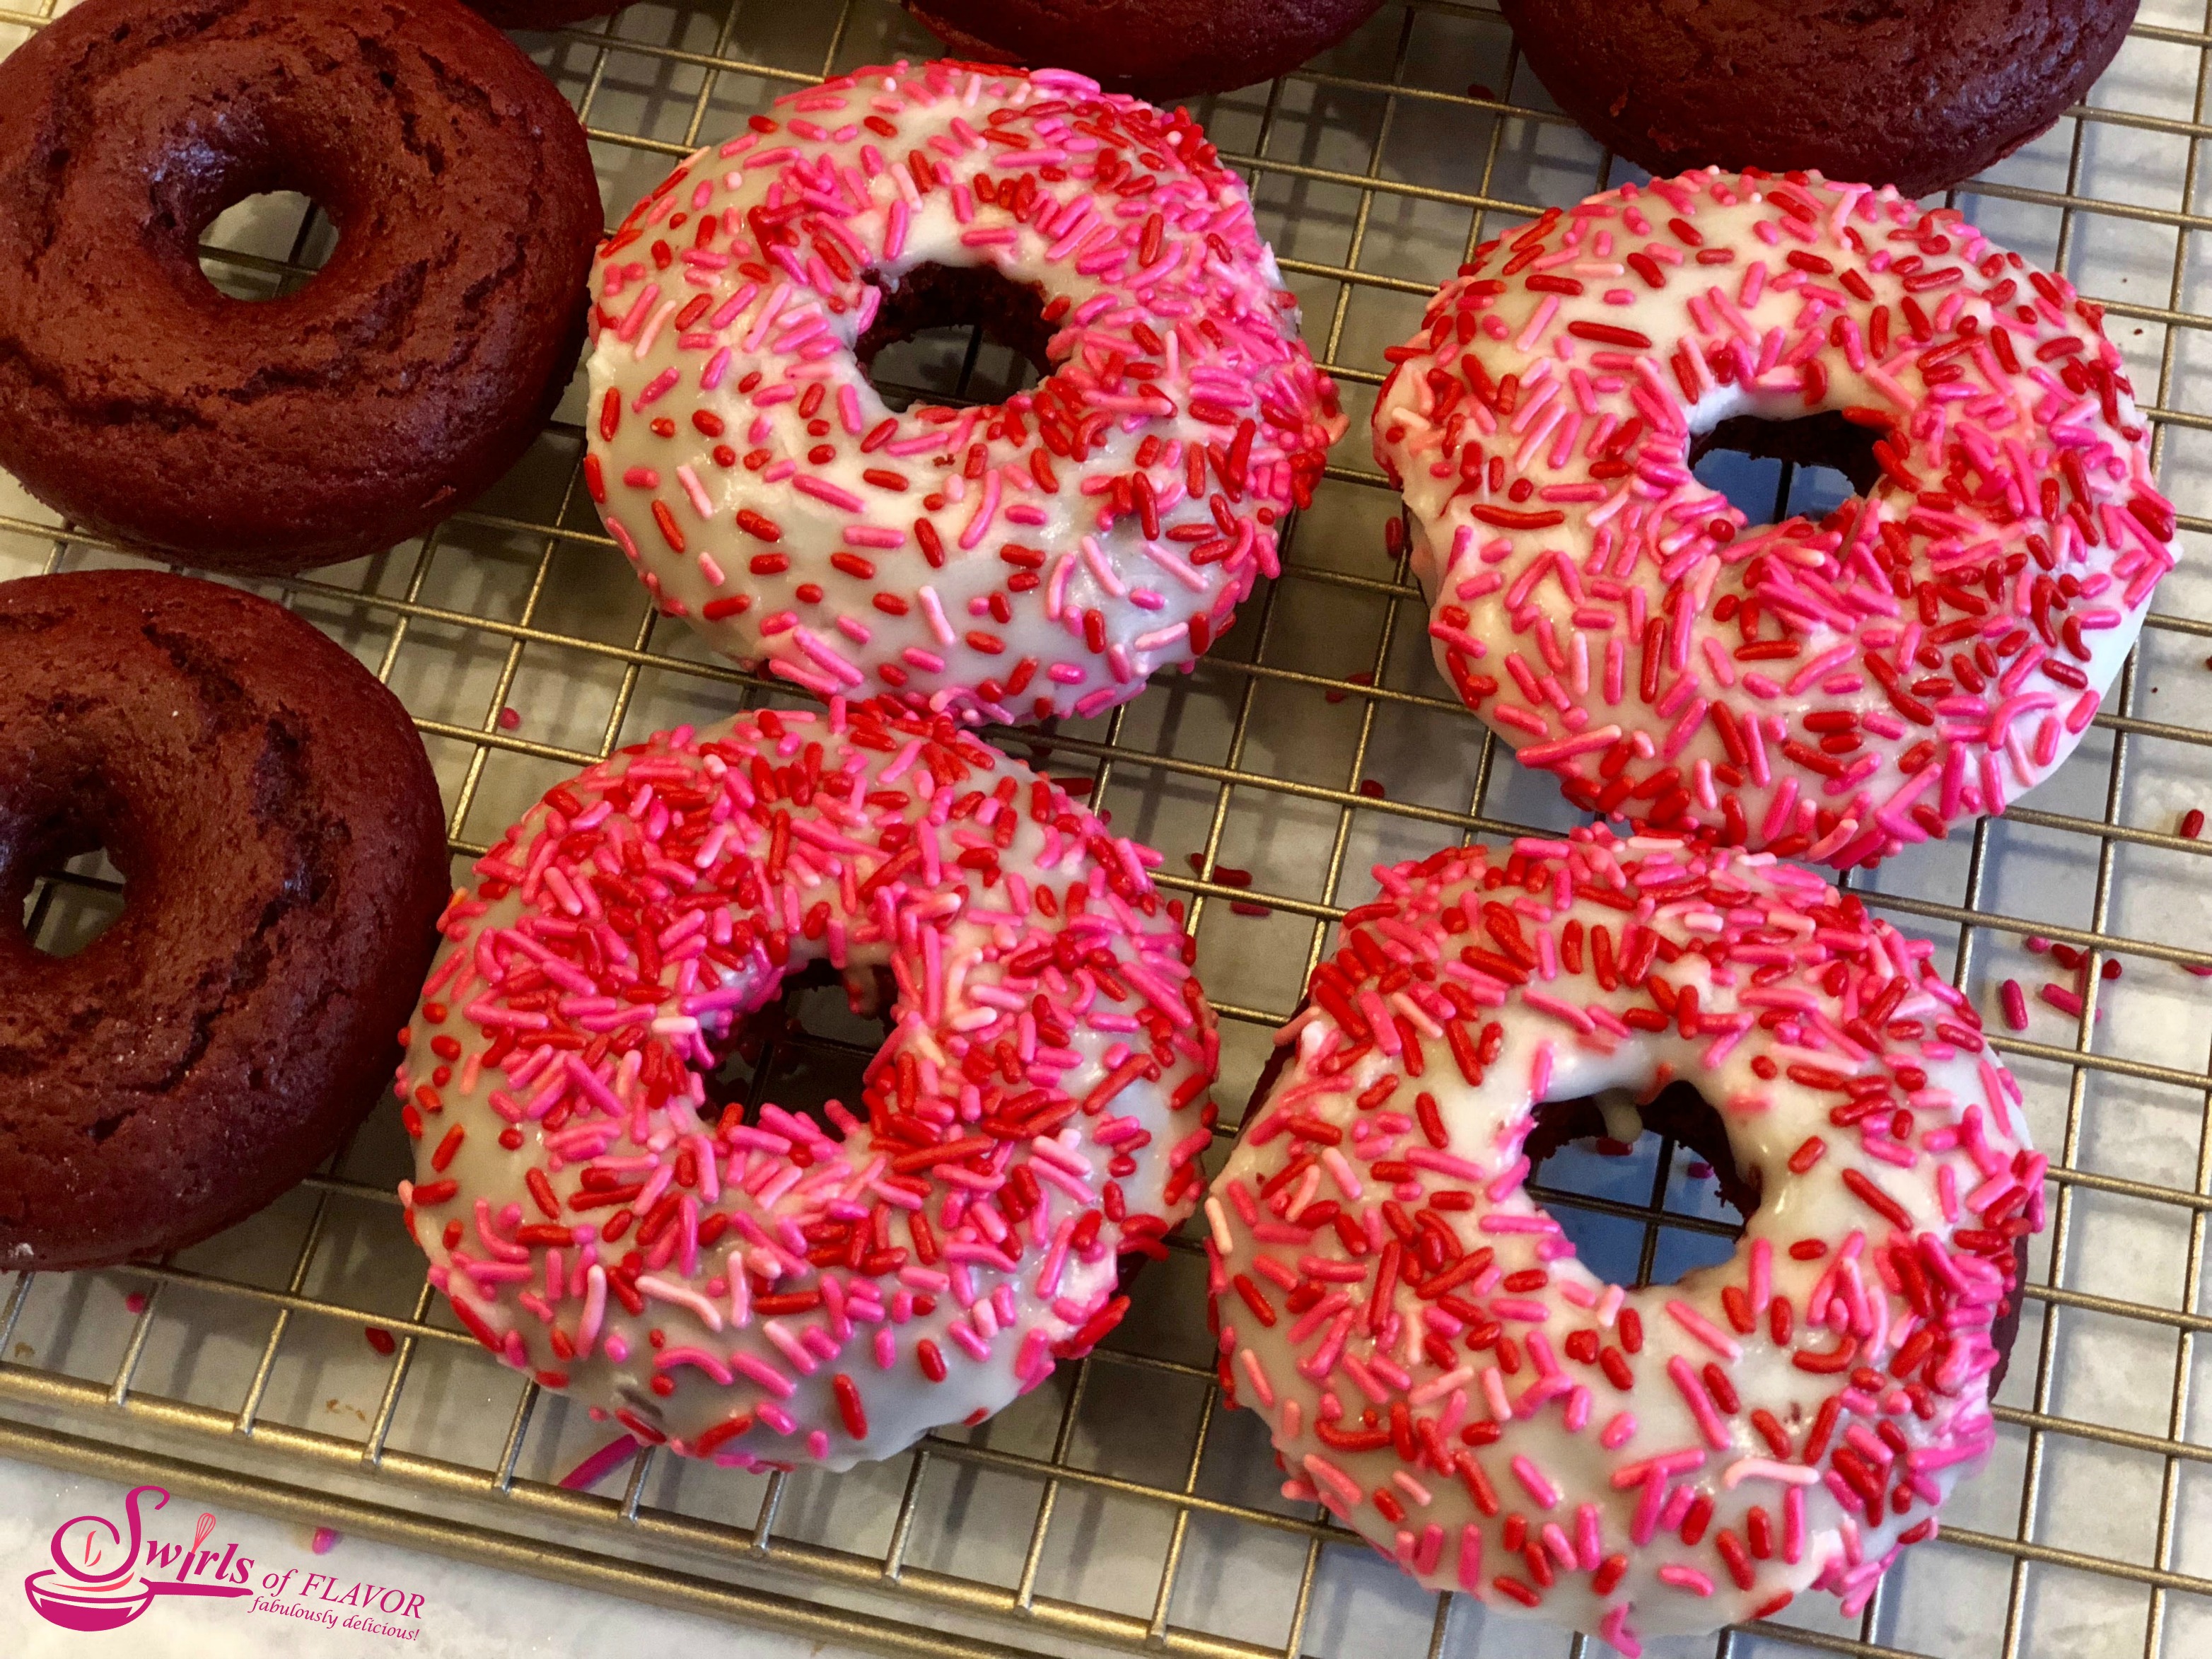 Baked Red velvet donuts with frosting and sprinkles 